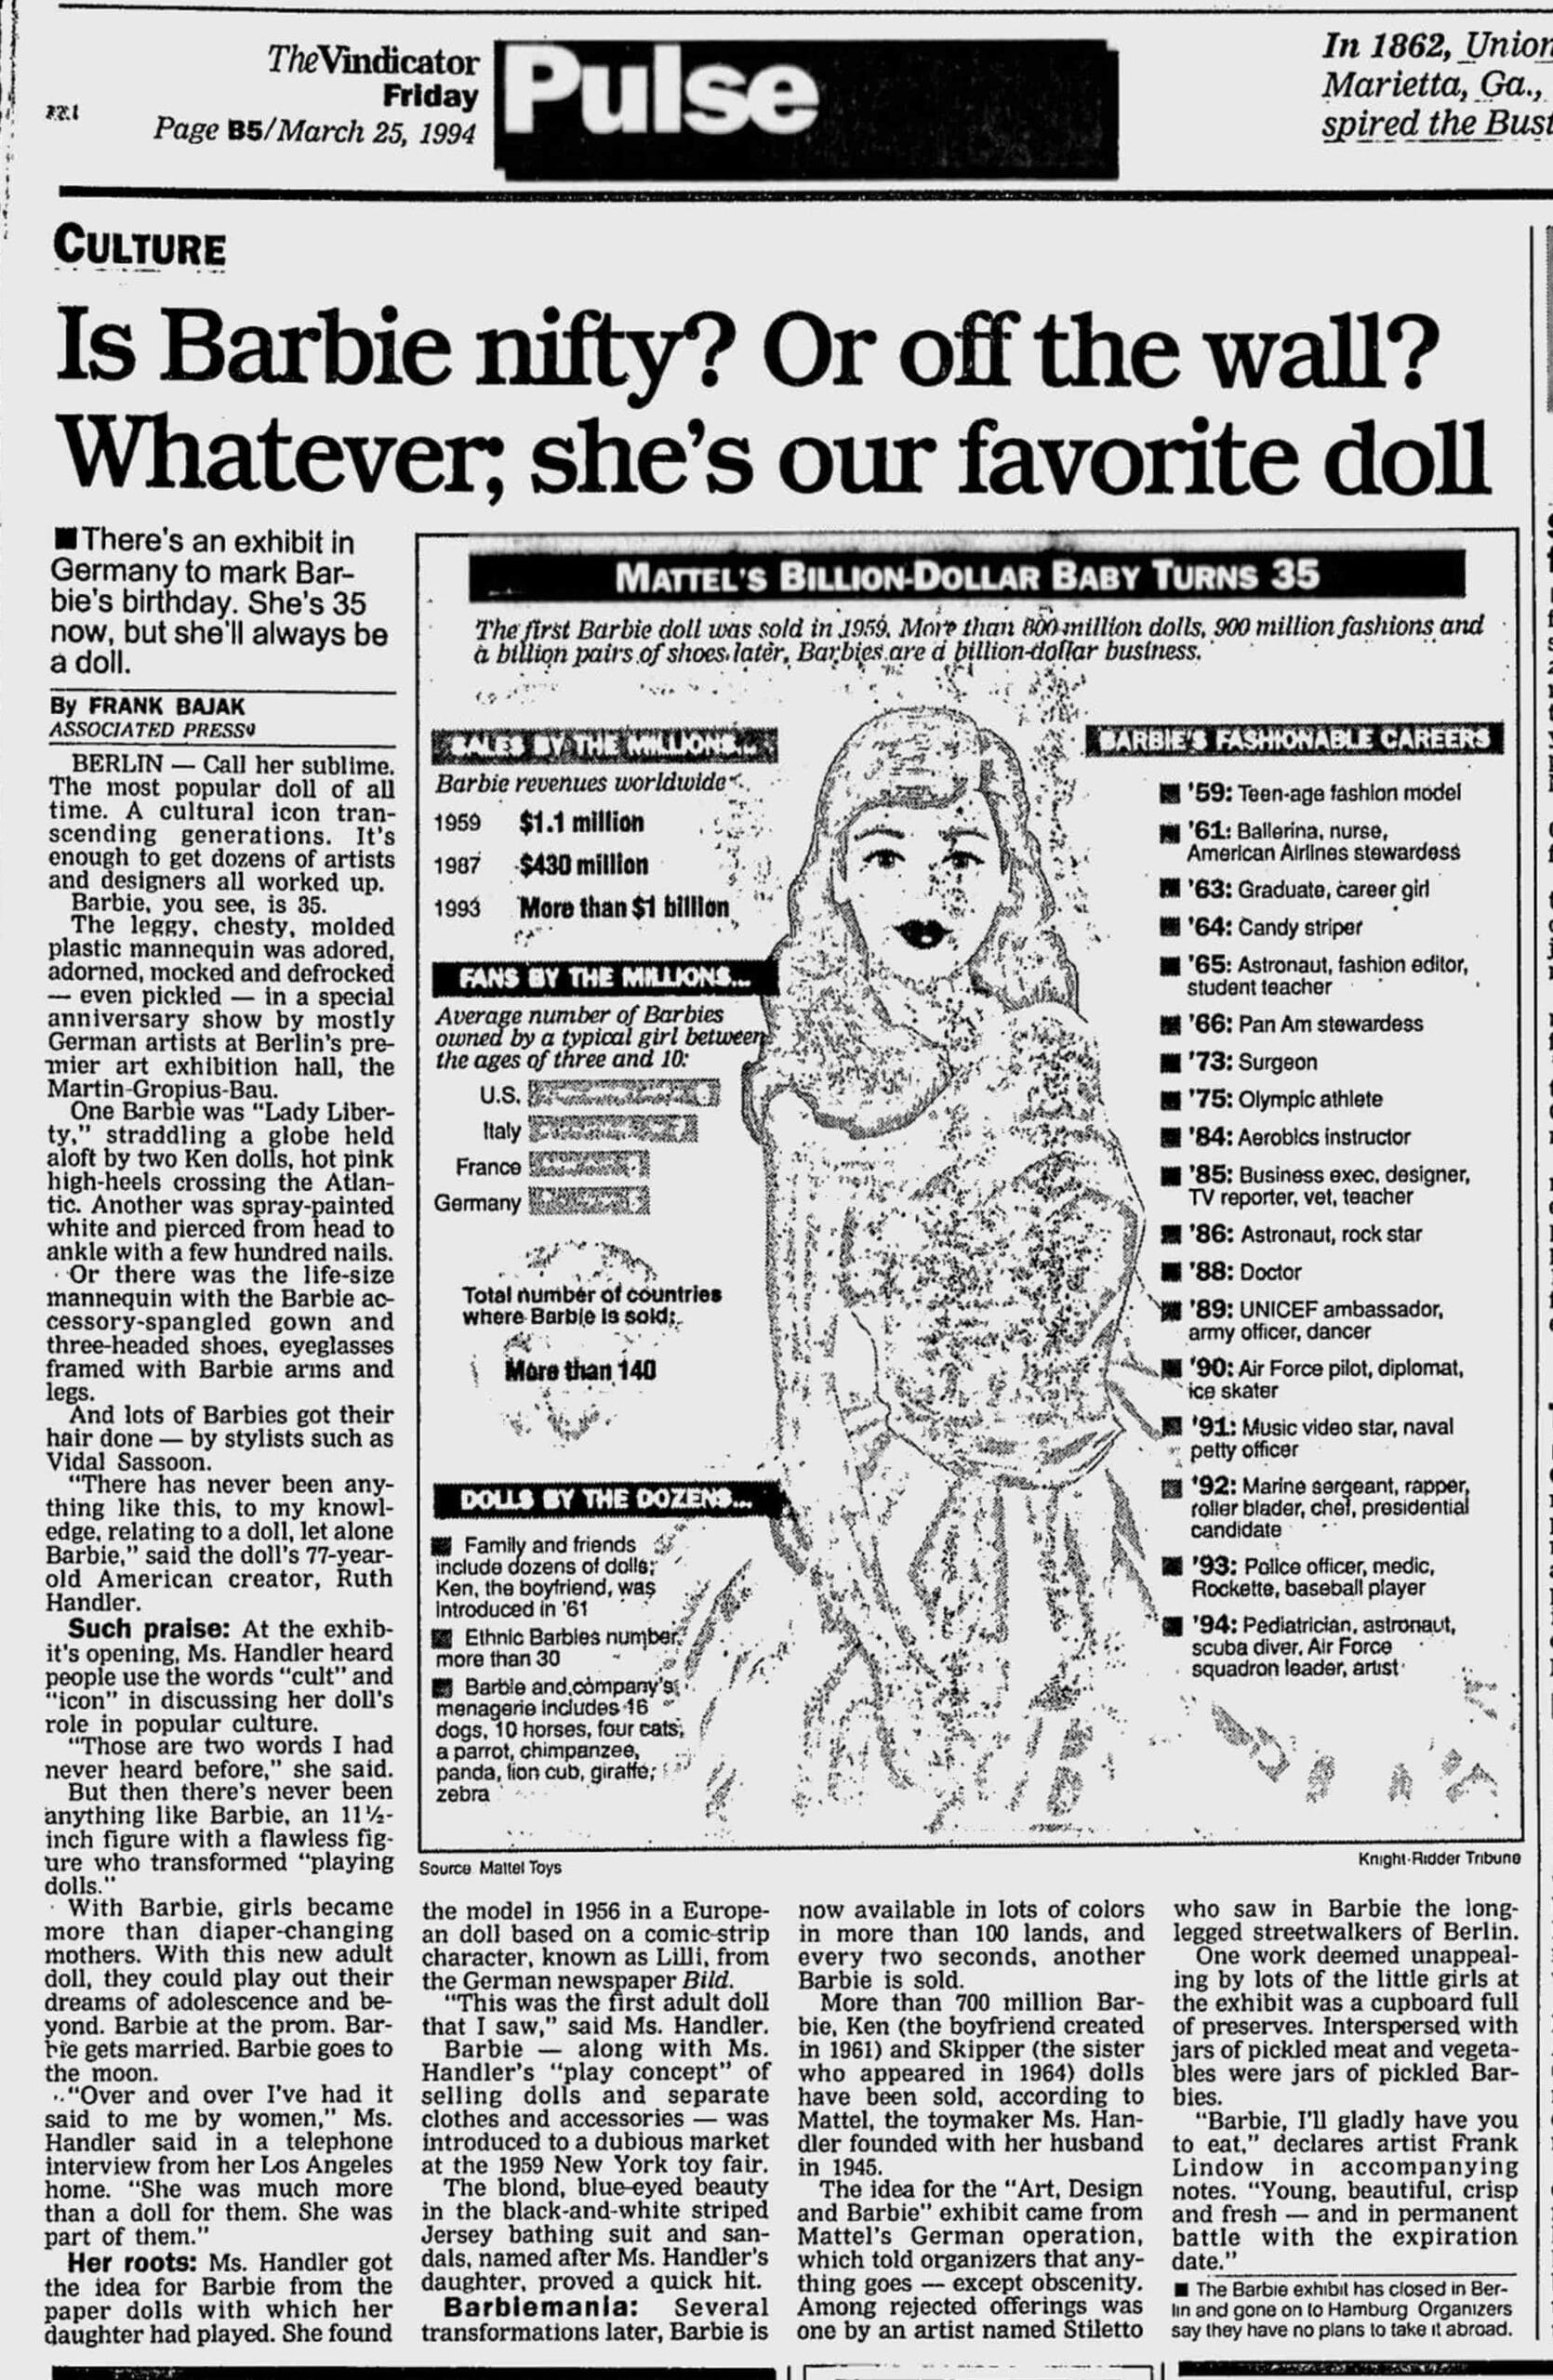 Article about Barbie's 35th birthday exhibition in Berlin in The Vindicator, March 25, 1994